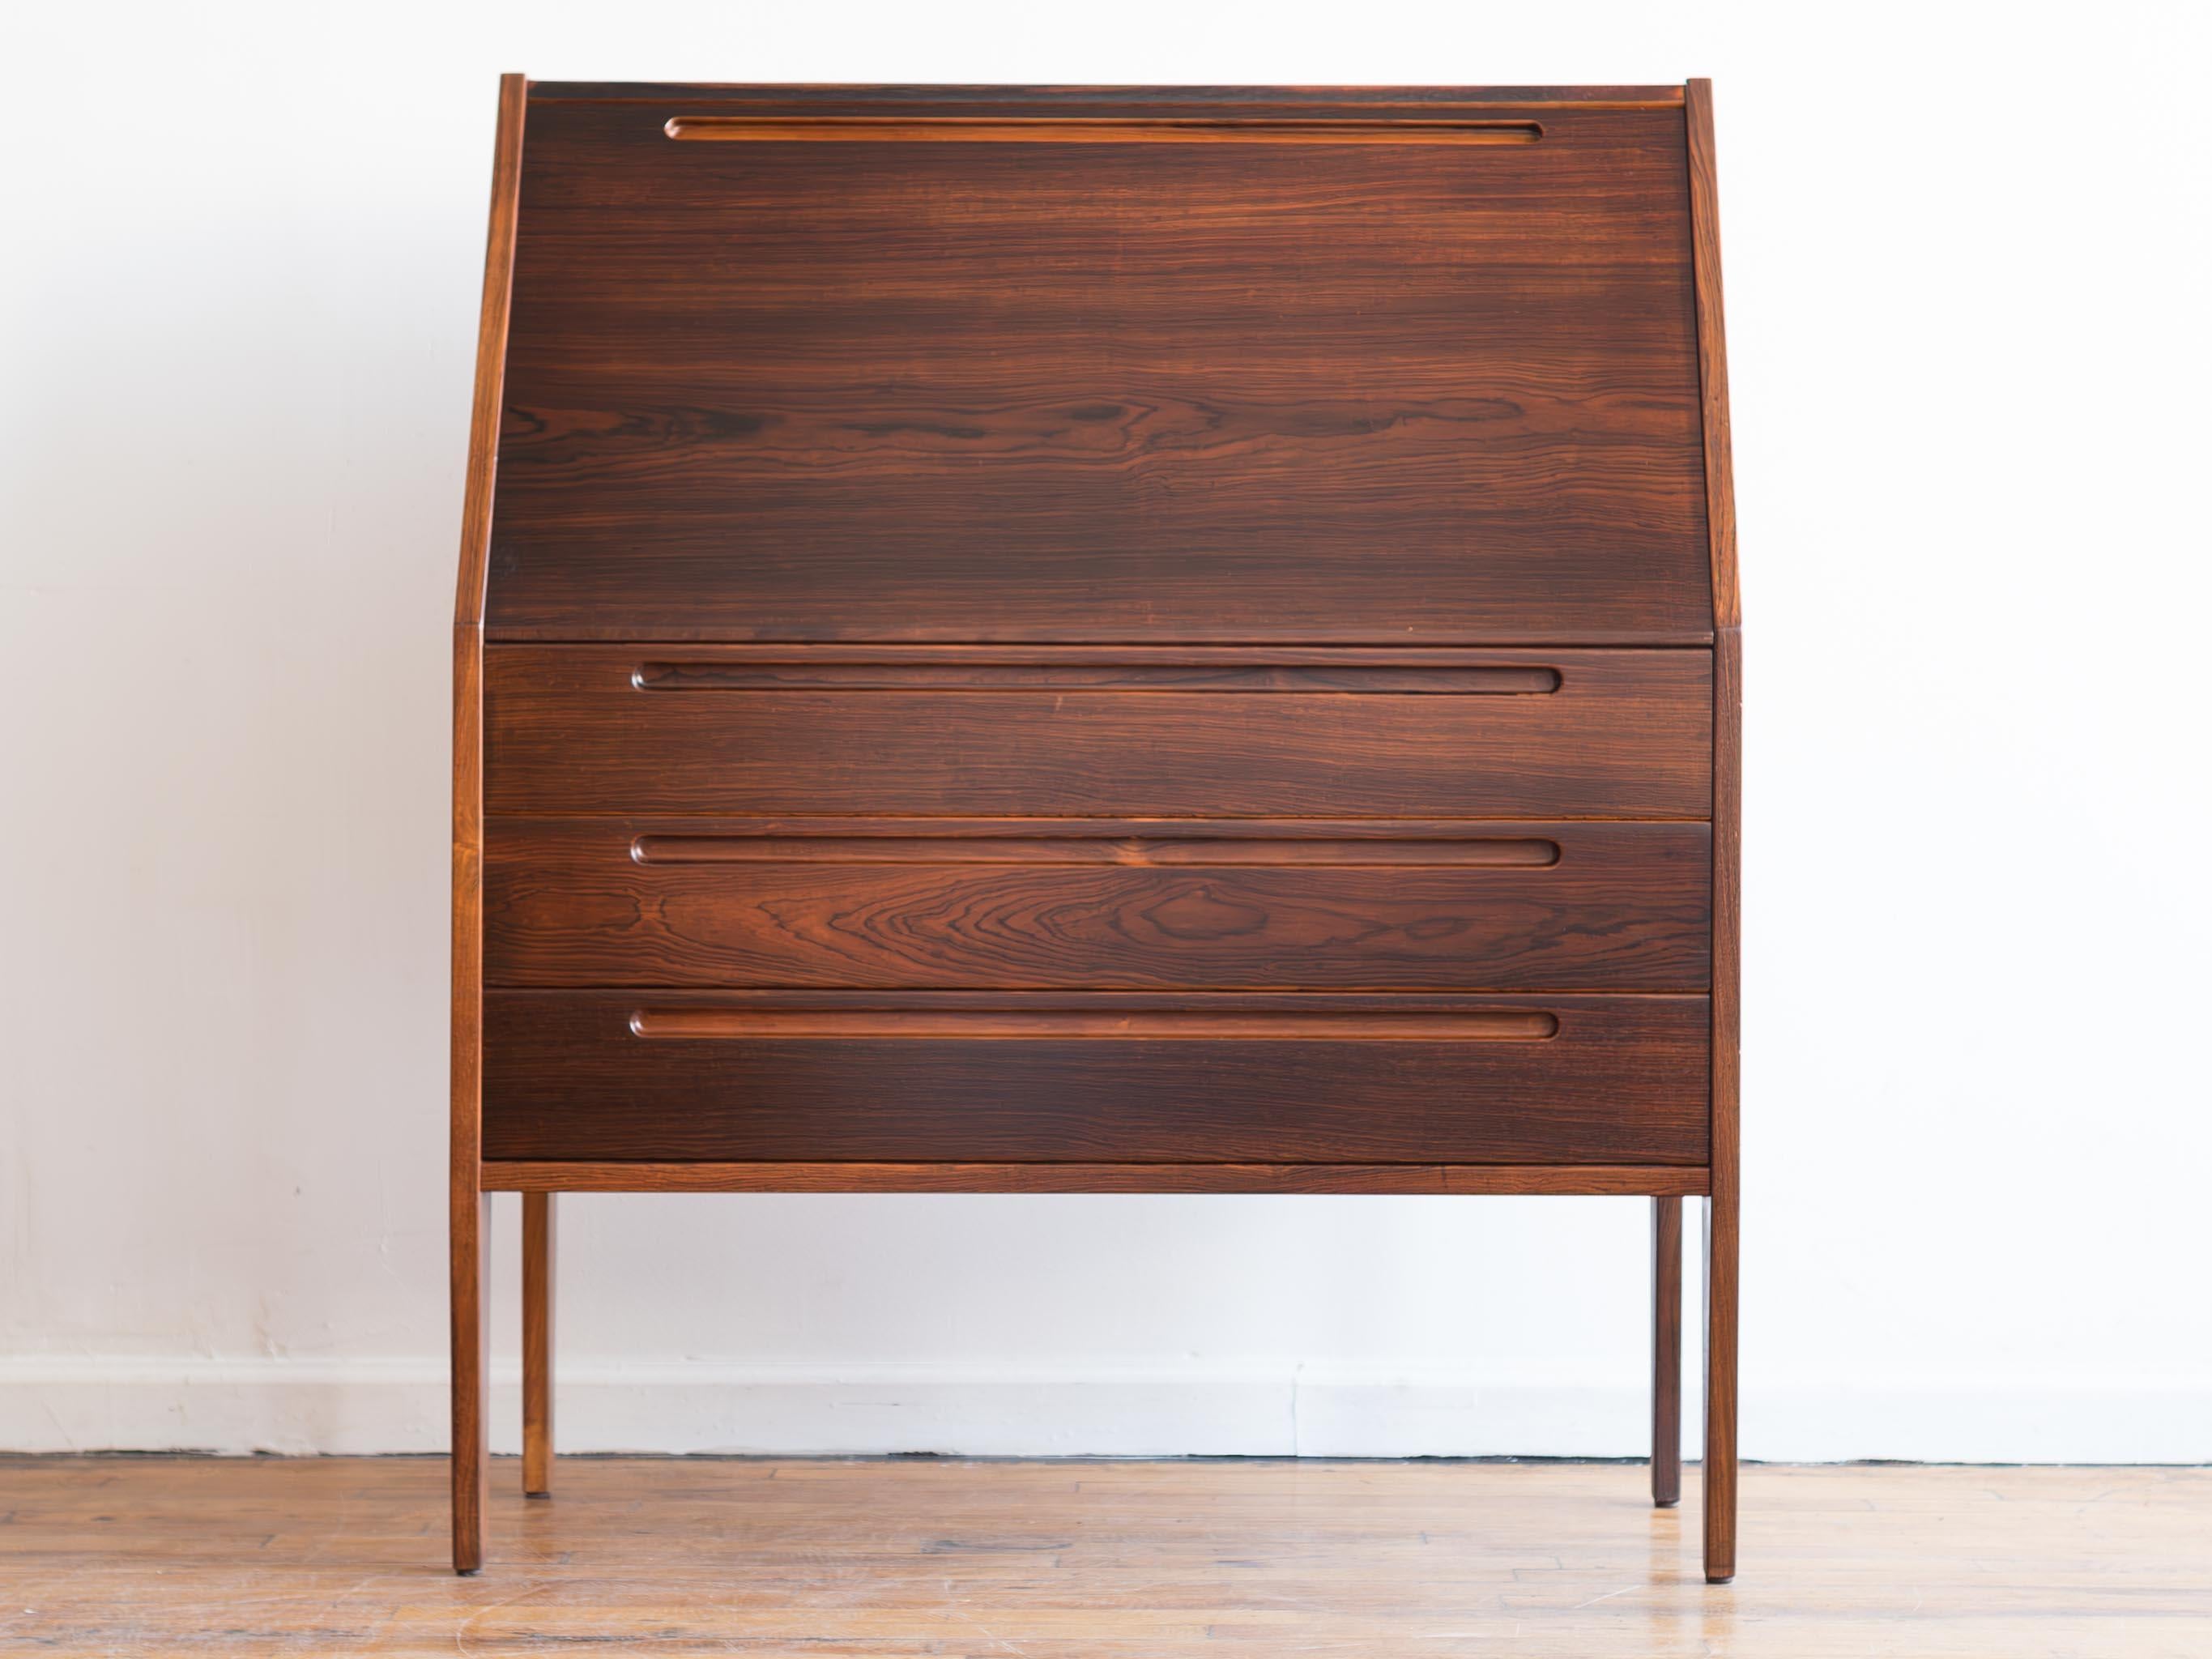 35.25” x 17” x 43”H; desk height 27”

Rosewood secretary desk by Kai Kristiansen for HNJ Møbler/Tørring Møbelfabrik (Denmark), circa 1960s. (Sometimes attributed to Nils Jonsson.)

•thee large lower drawers
•three upper drawers in dovetailed solid